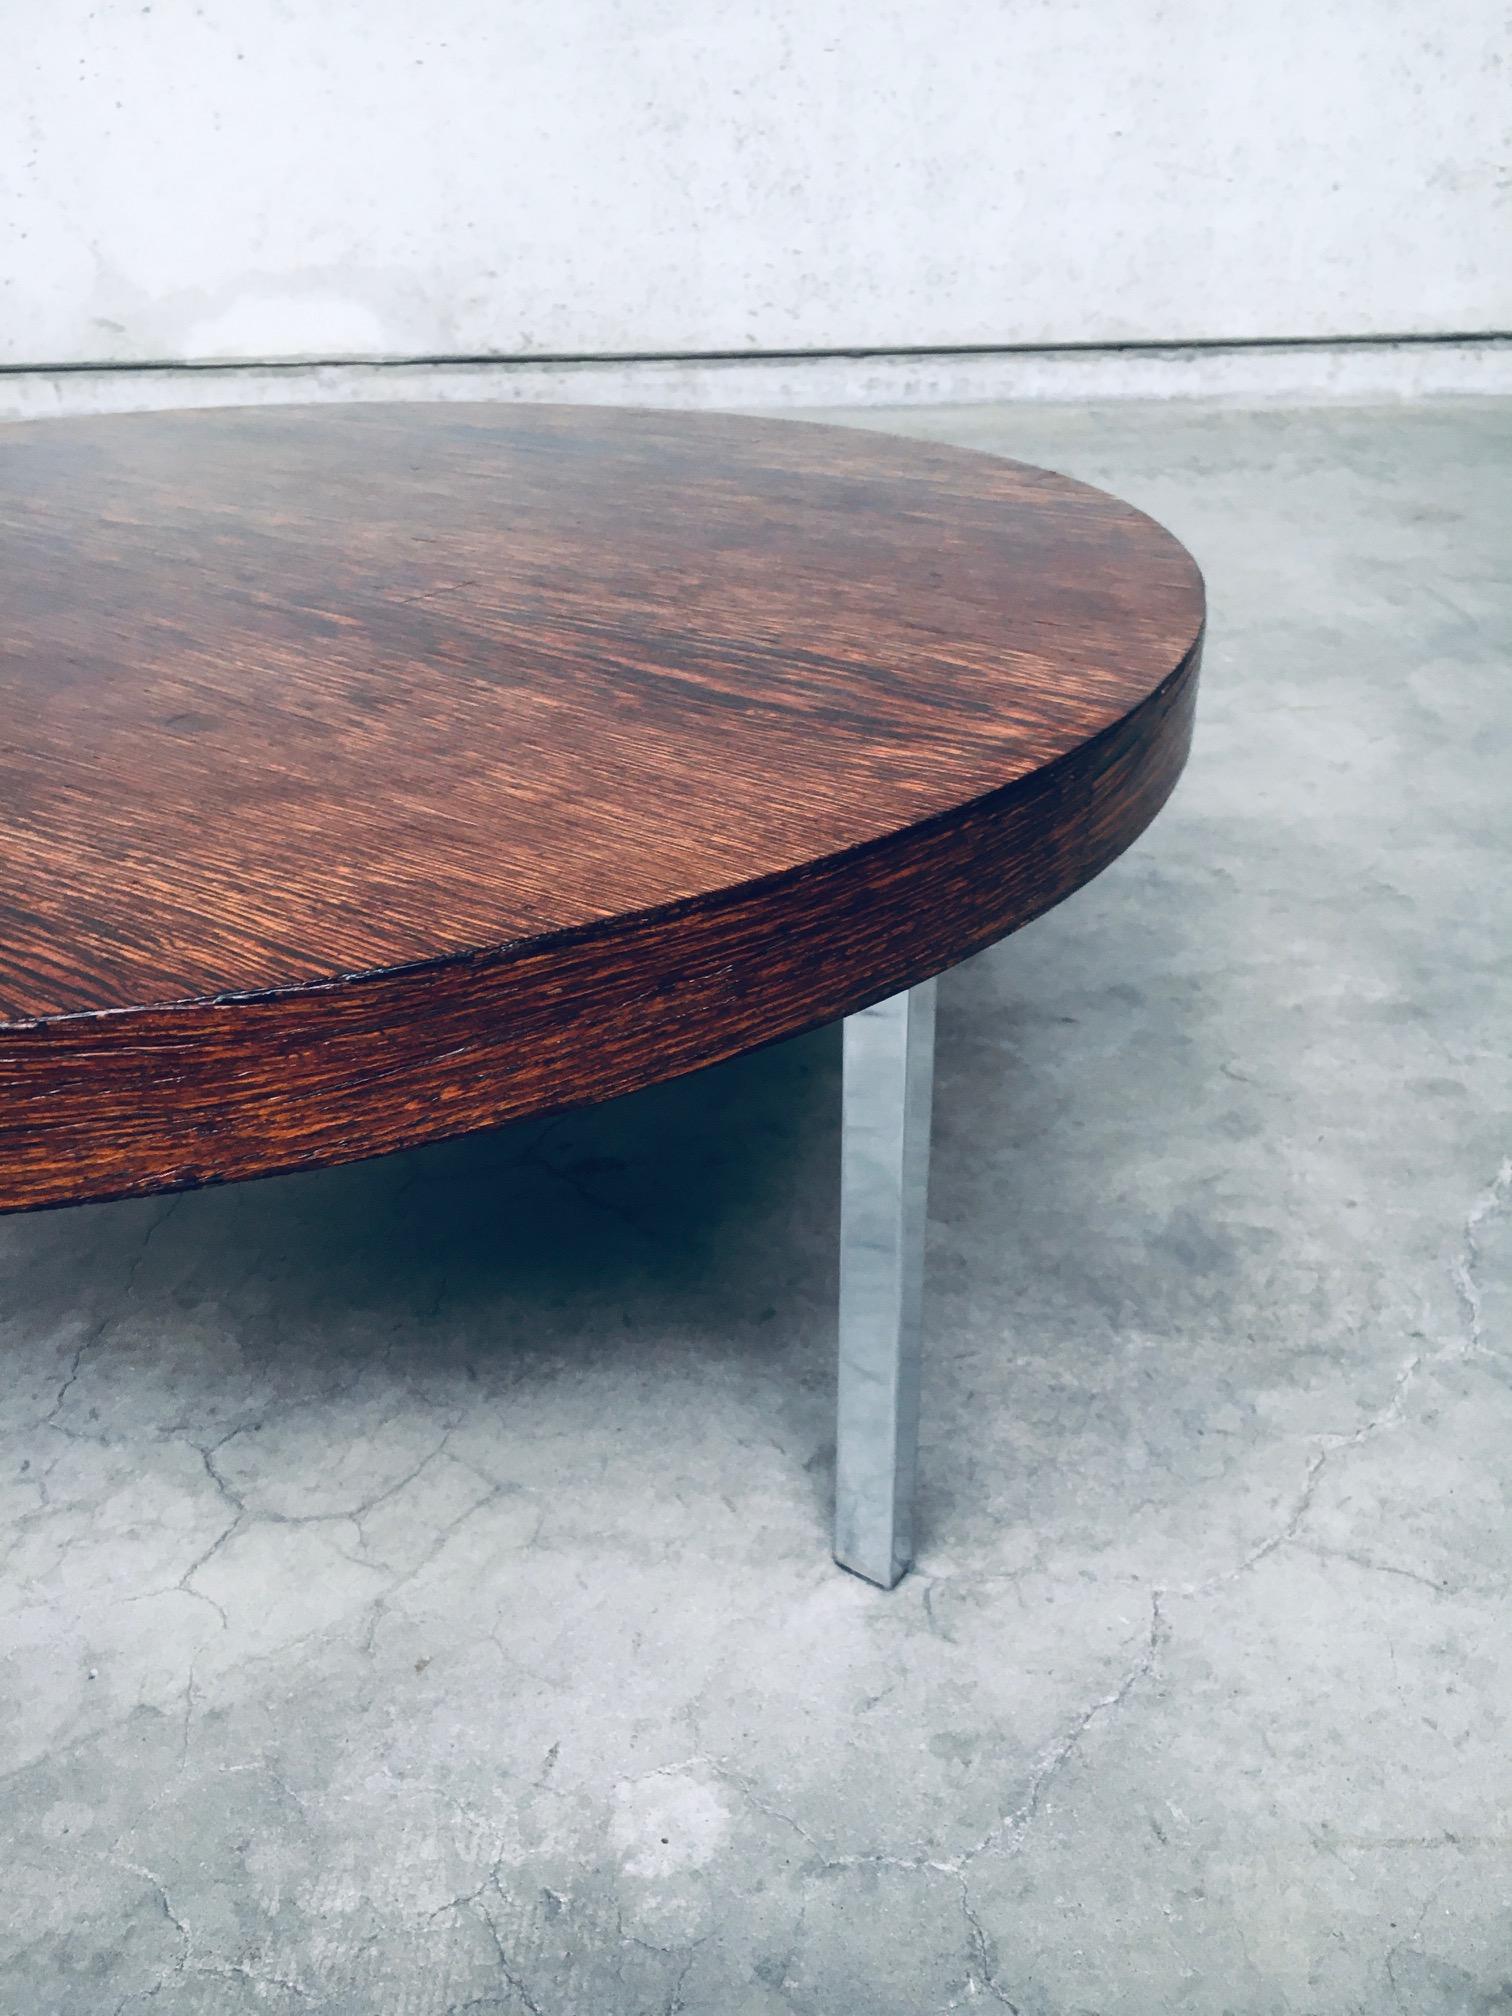 Midcentury Modern Dutch Design Tripod Coffee Table, Netherlands 1960's For Sale 4